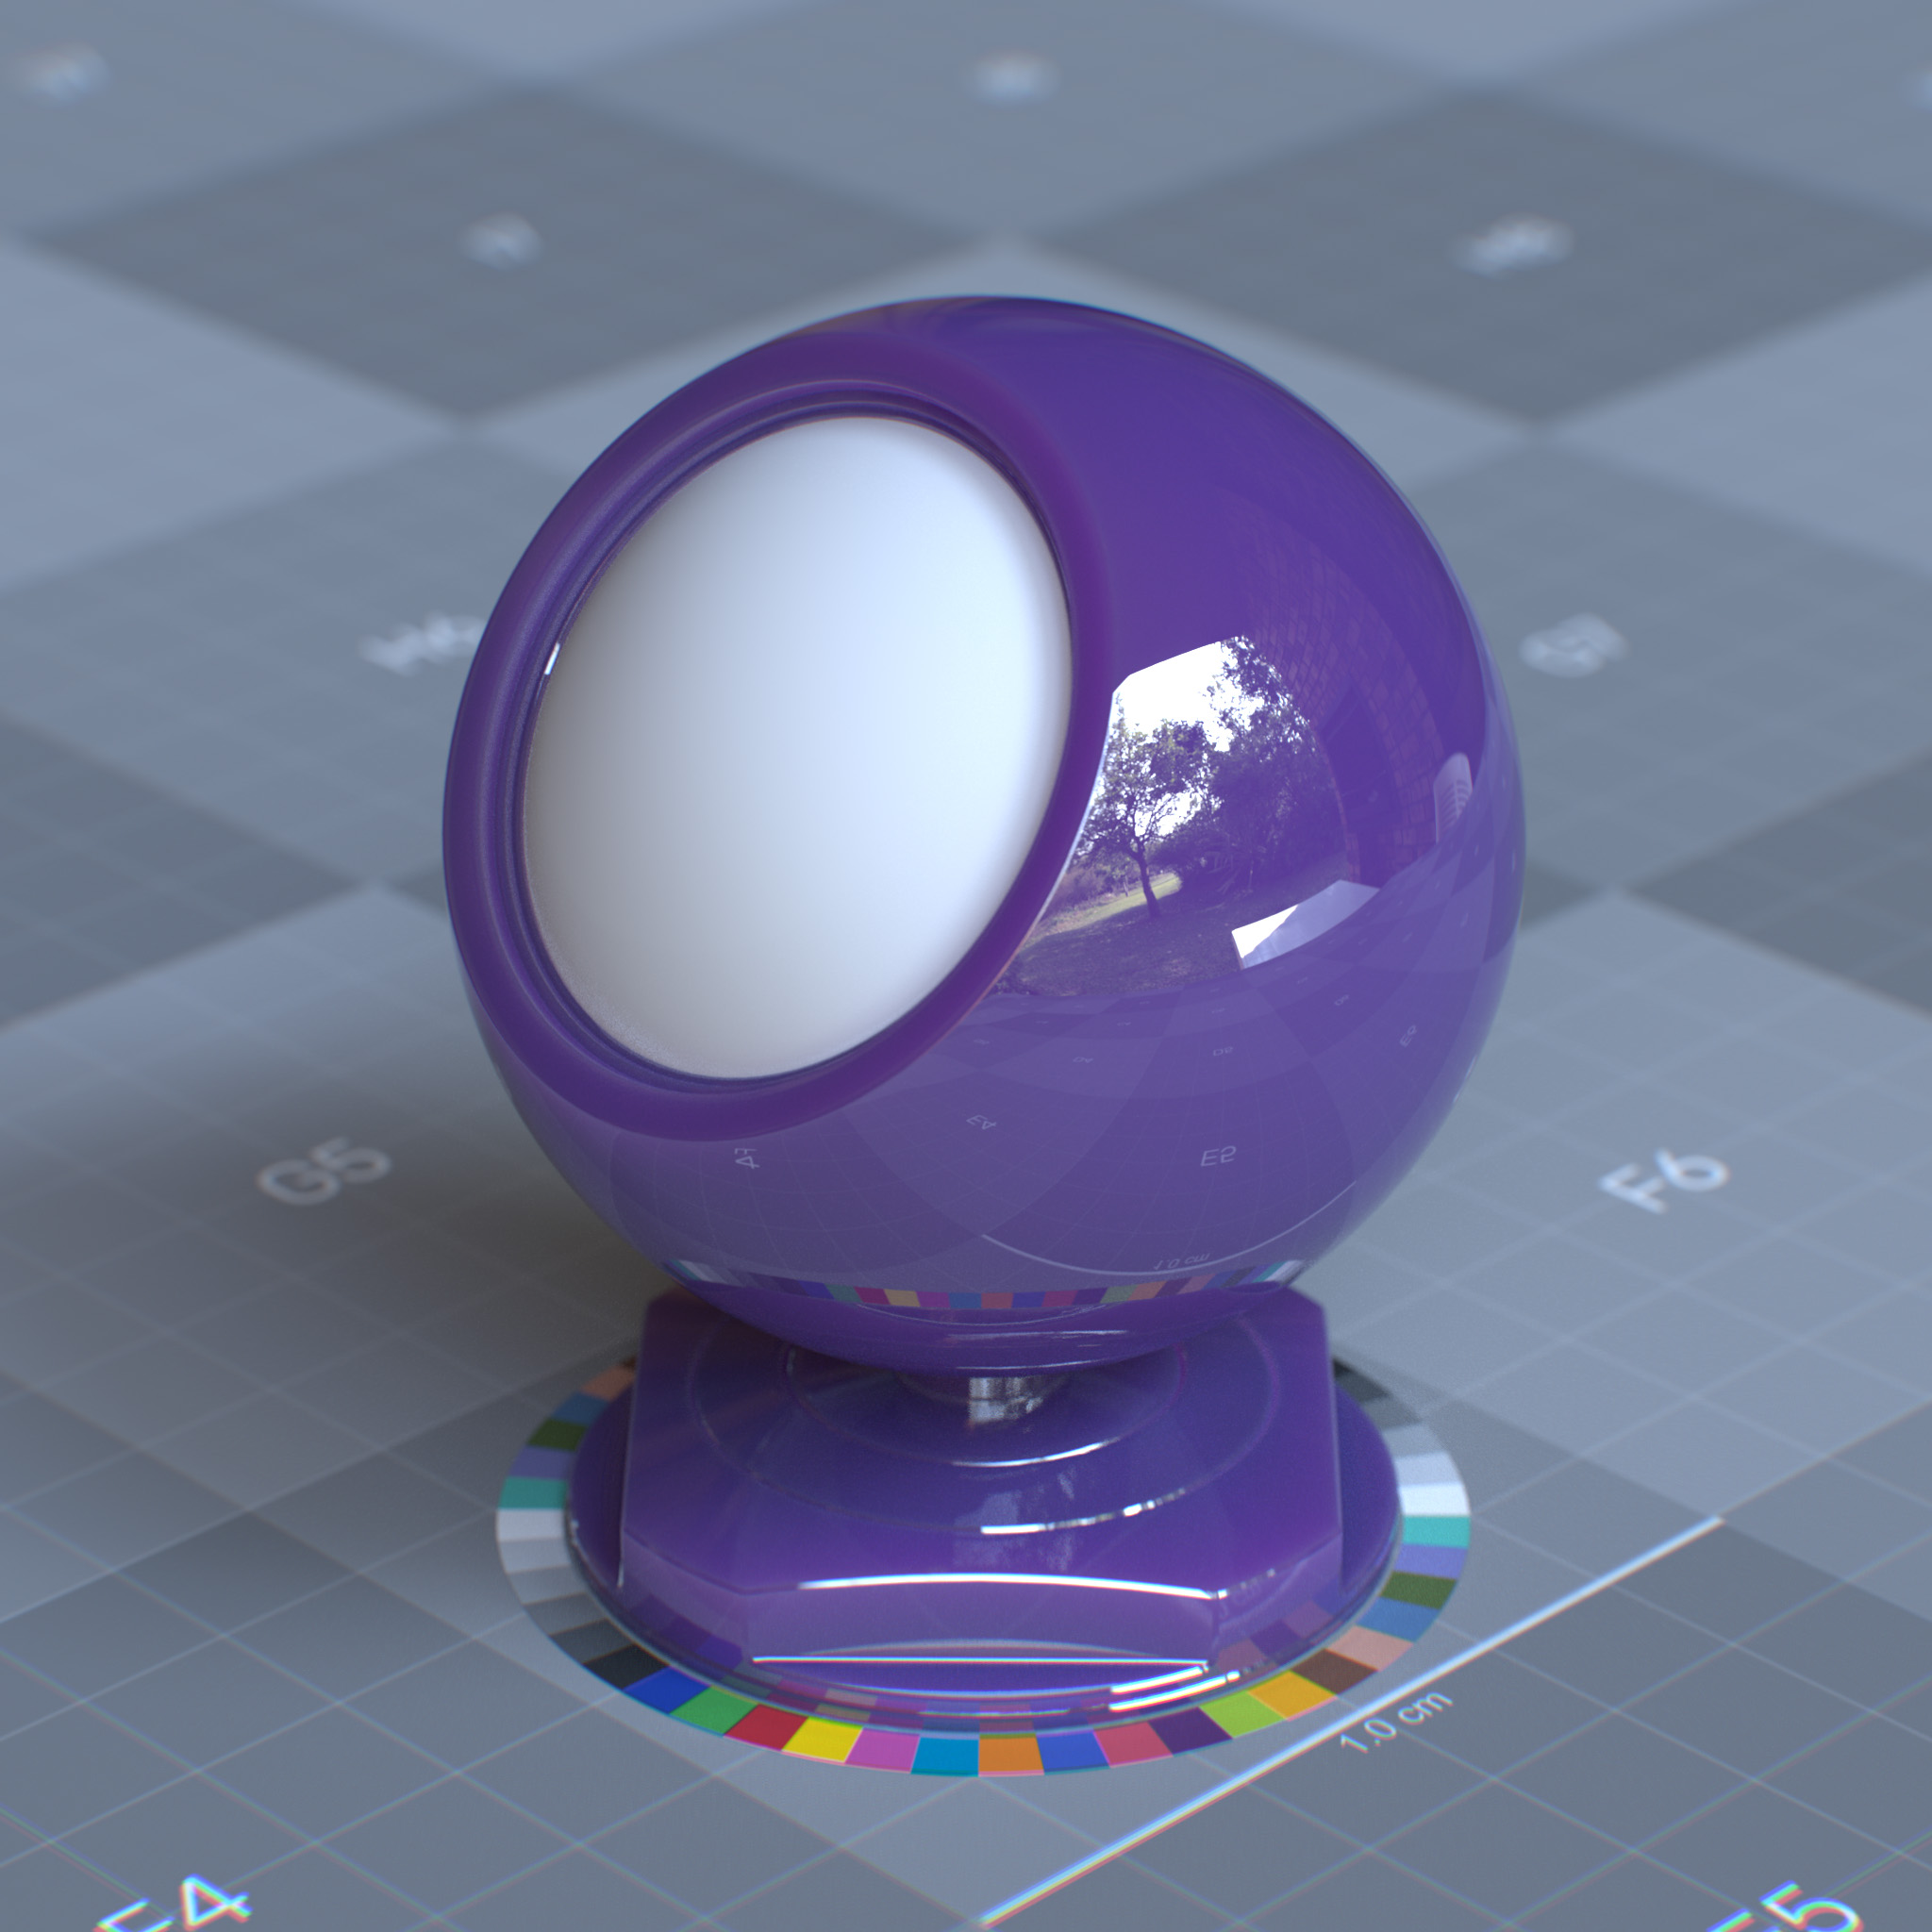 rtx_material_omnisurfacebase_specular_reflection_ior_2p5